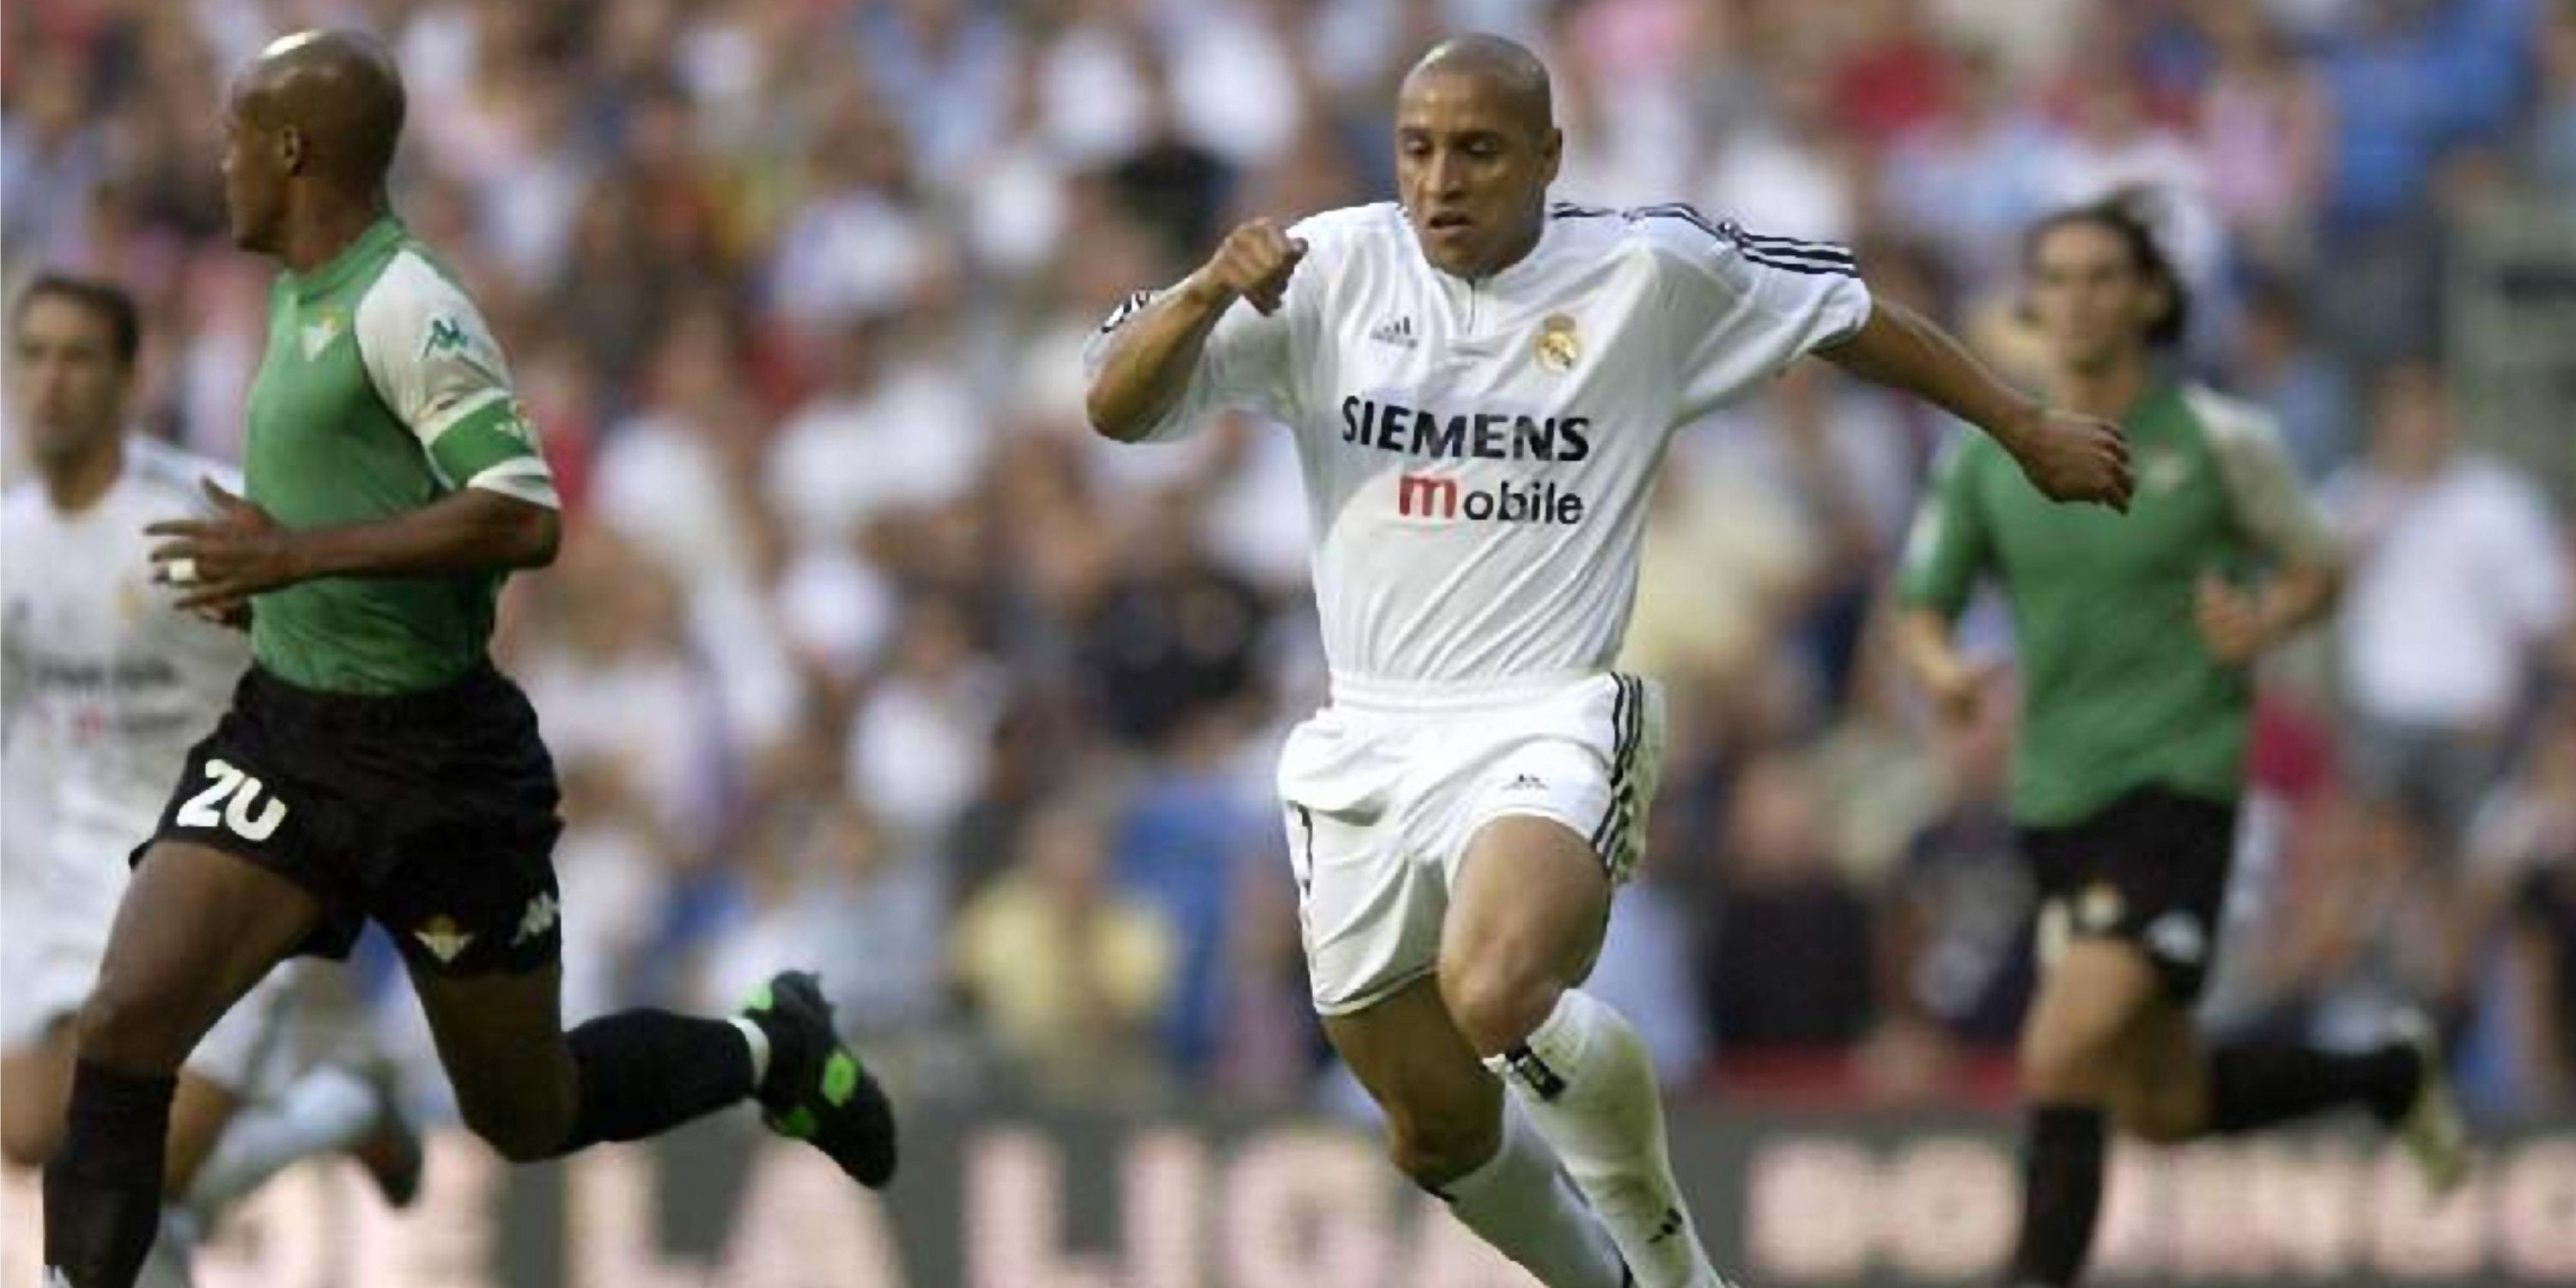 Roberto Carlos dribbles with the ball.